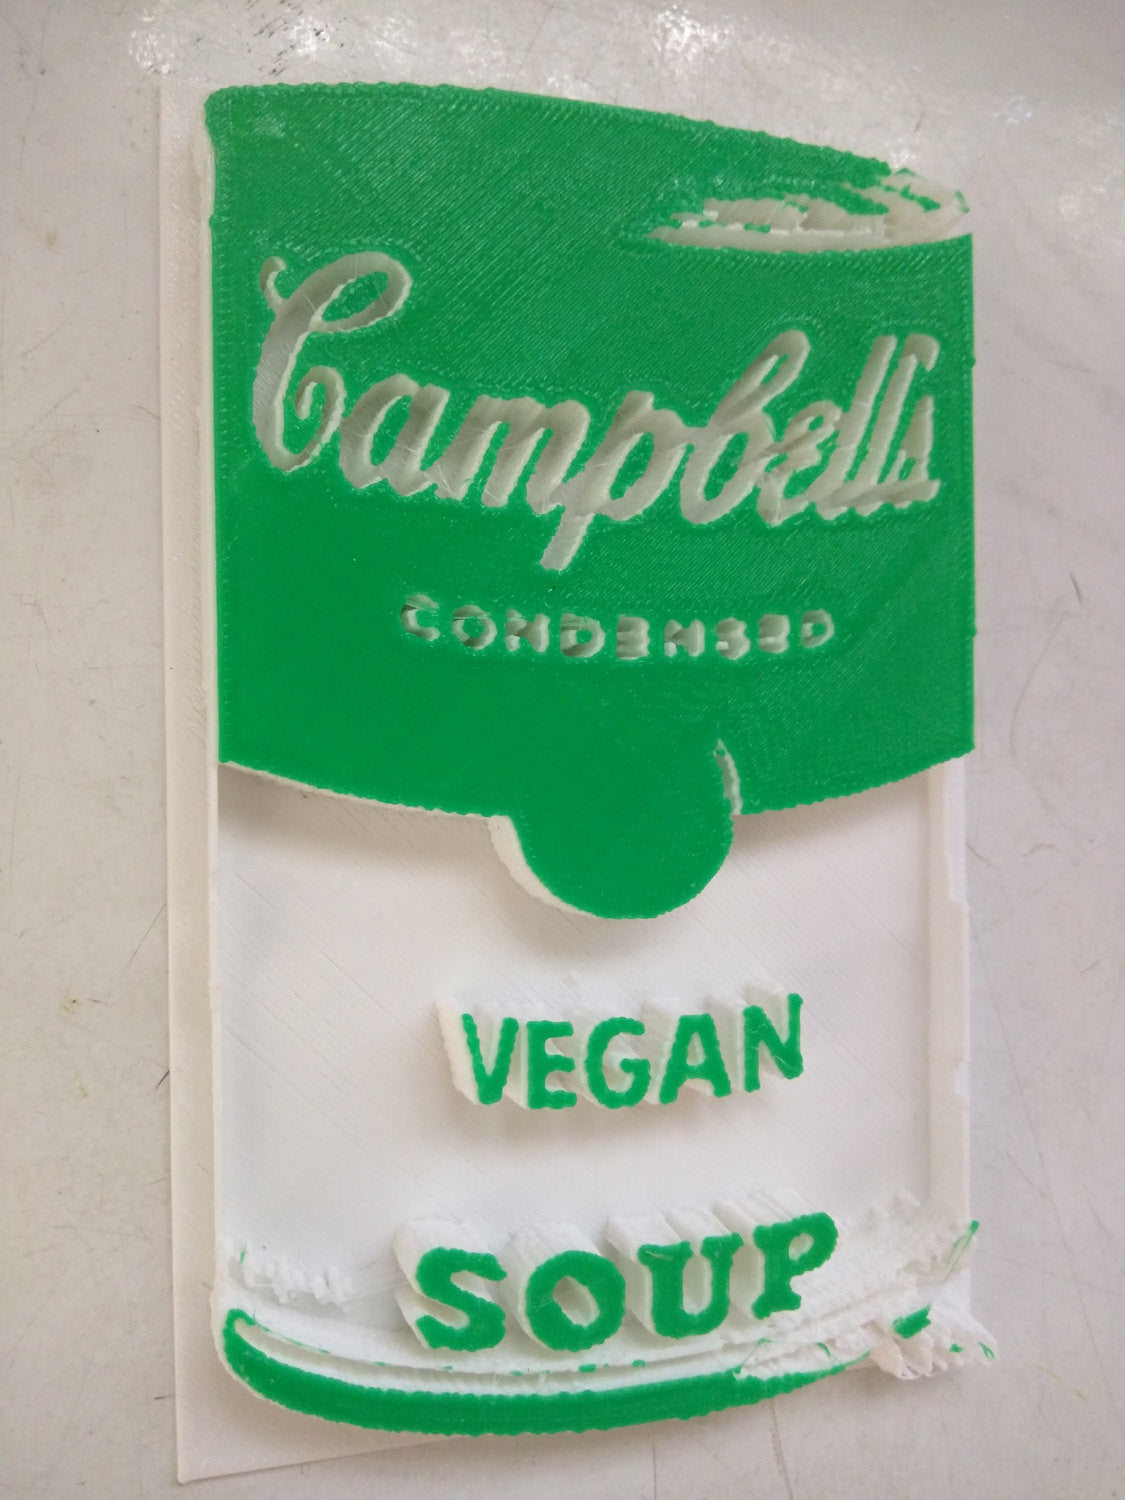 3D printed Campbell's Vegan Soup Green & White by L3f0u